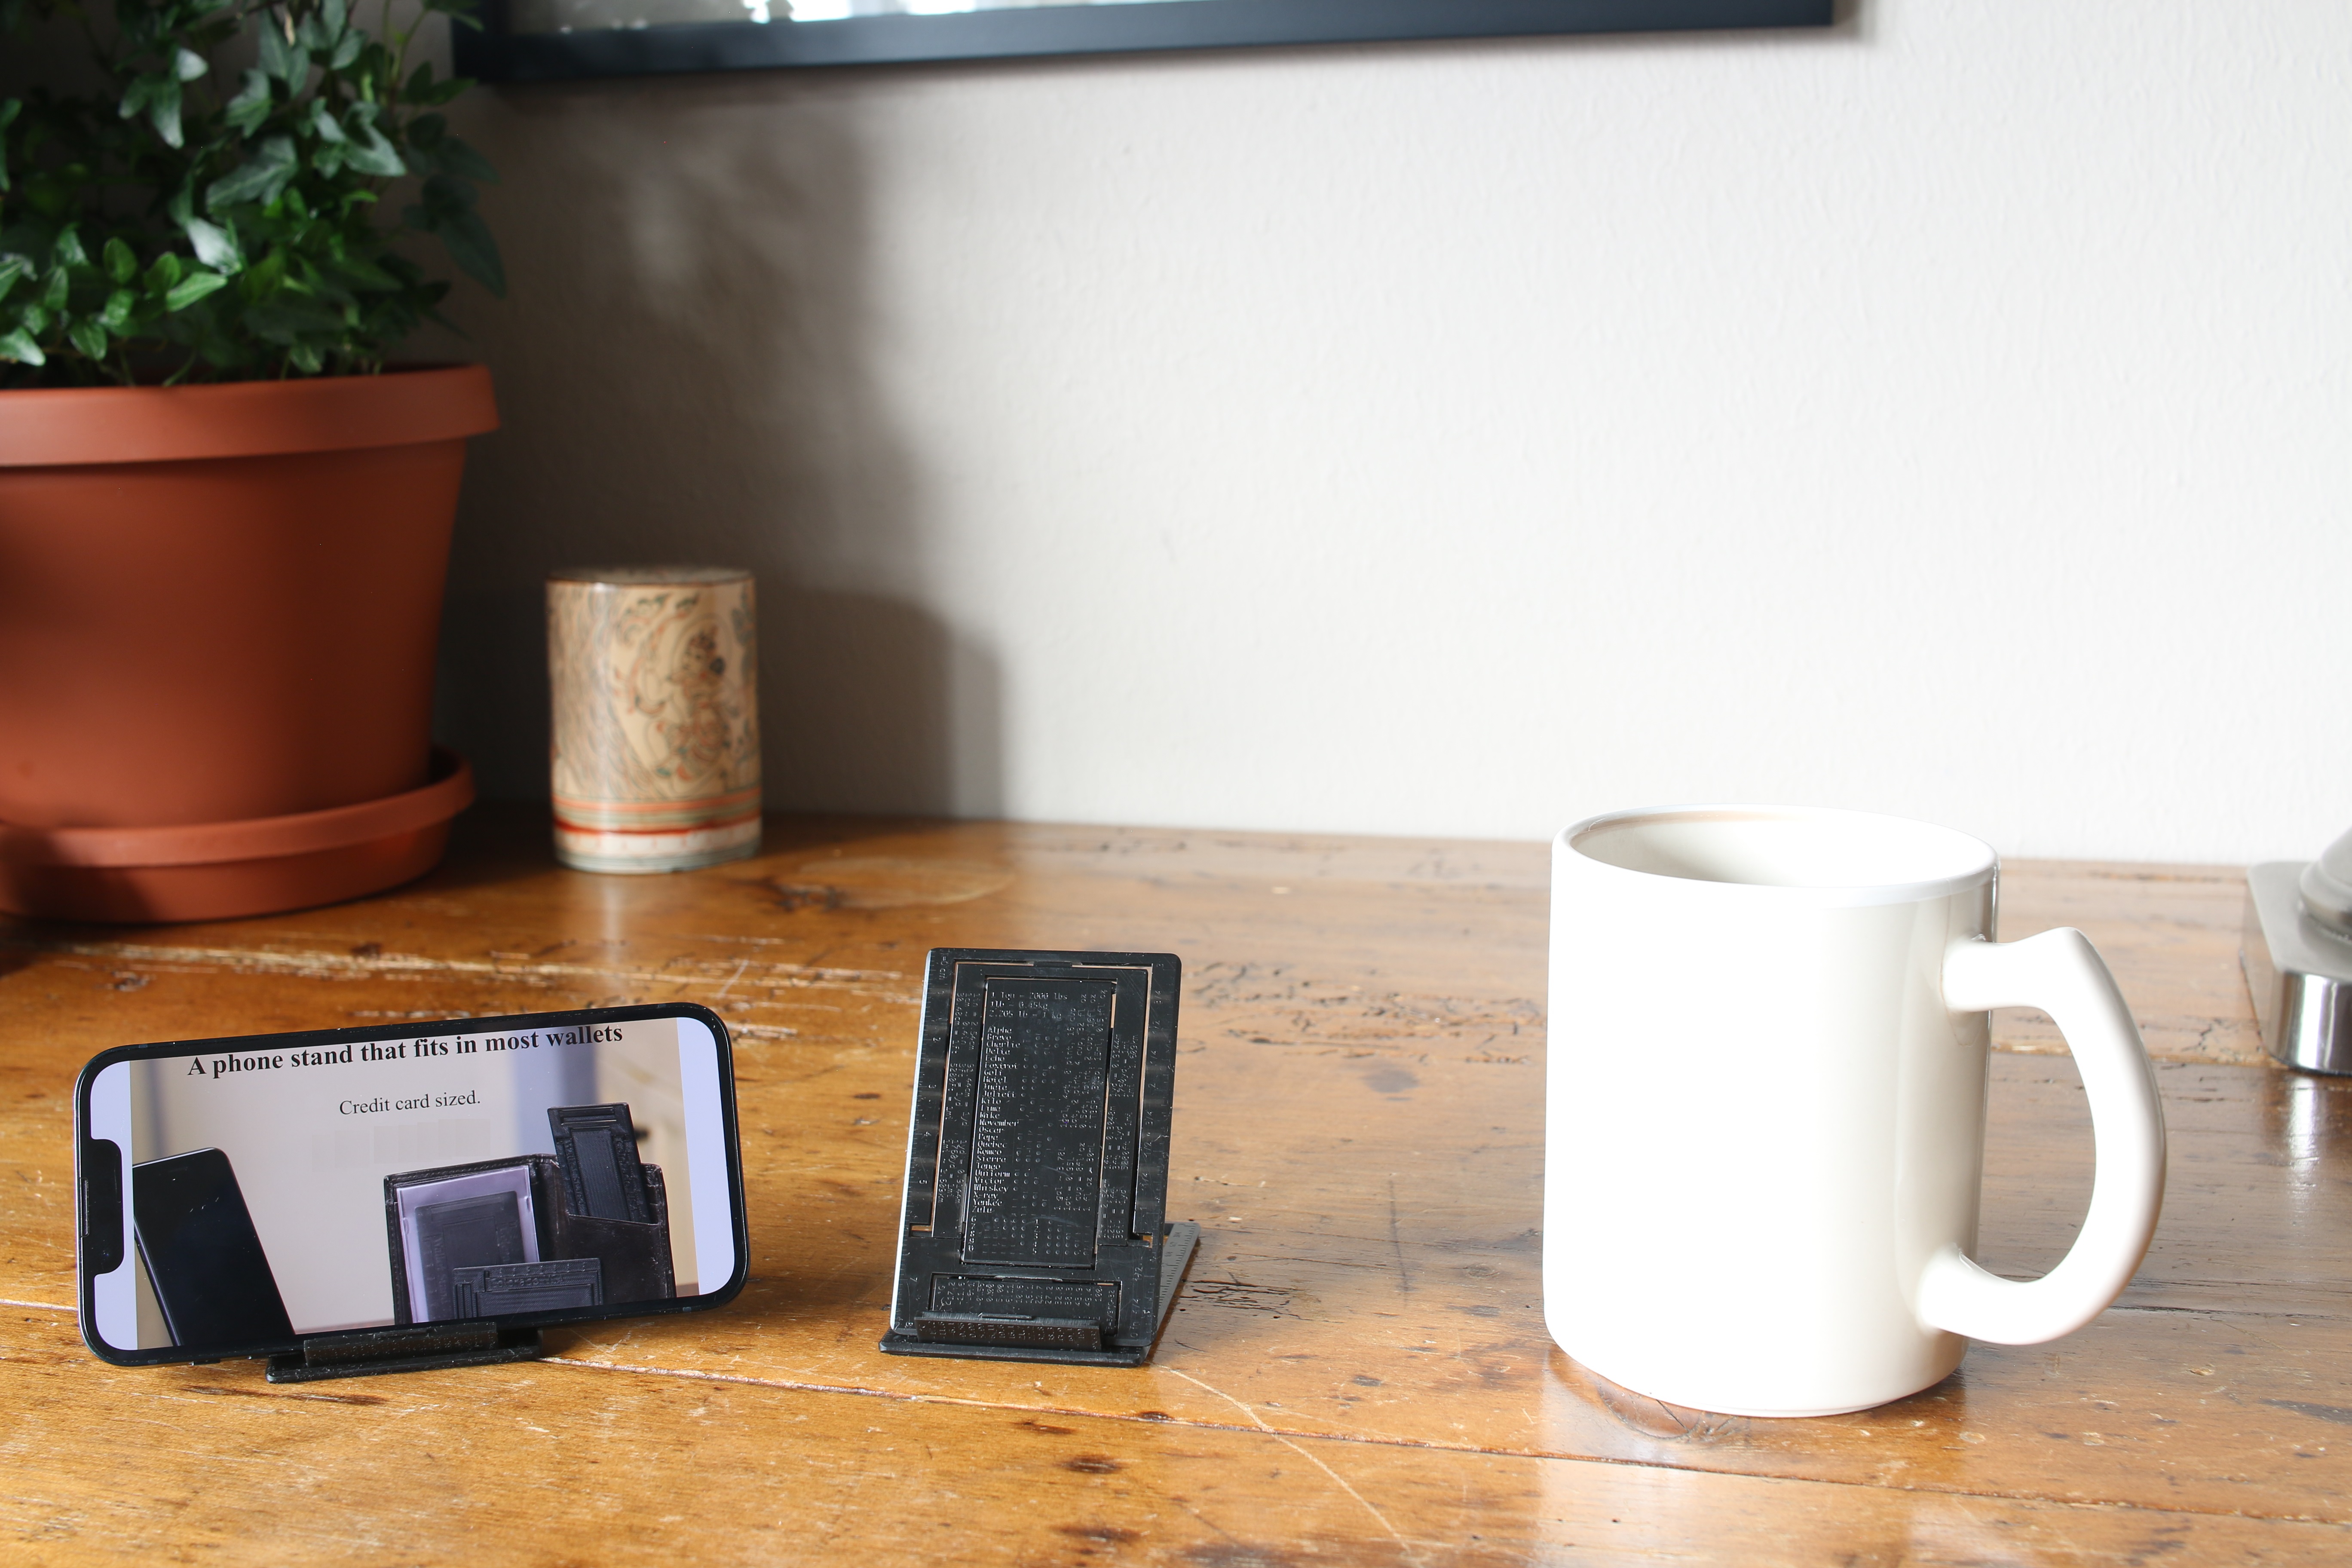 Wallet sized phone stand, WalletStand, in use.